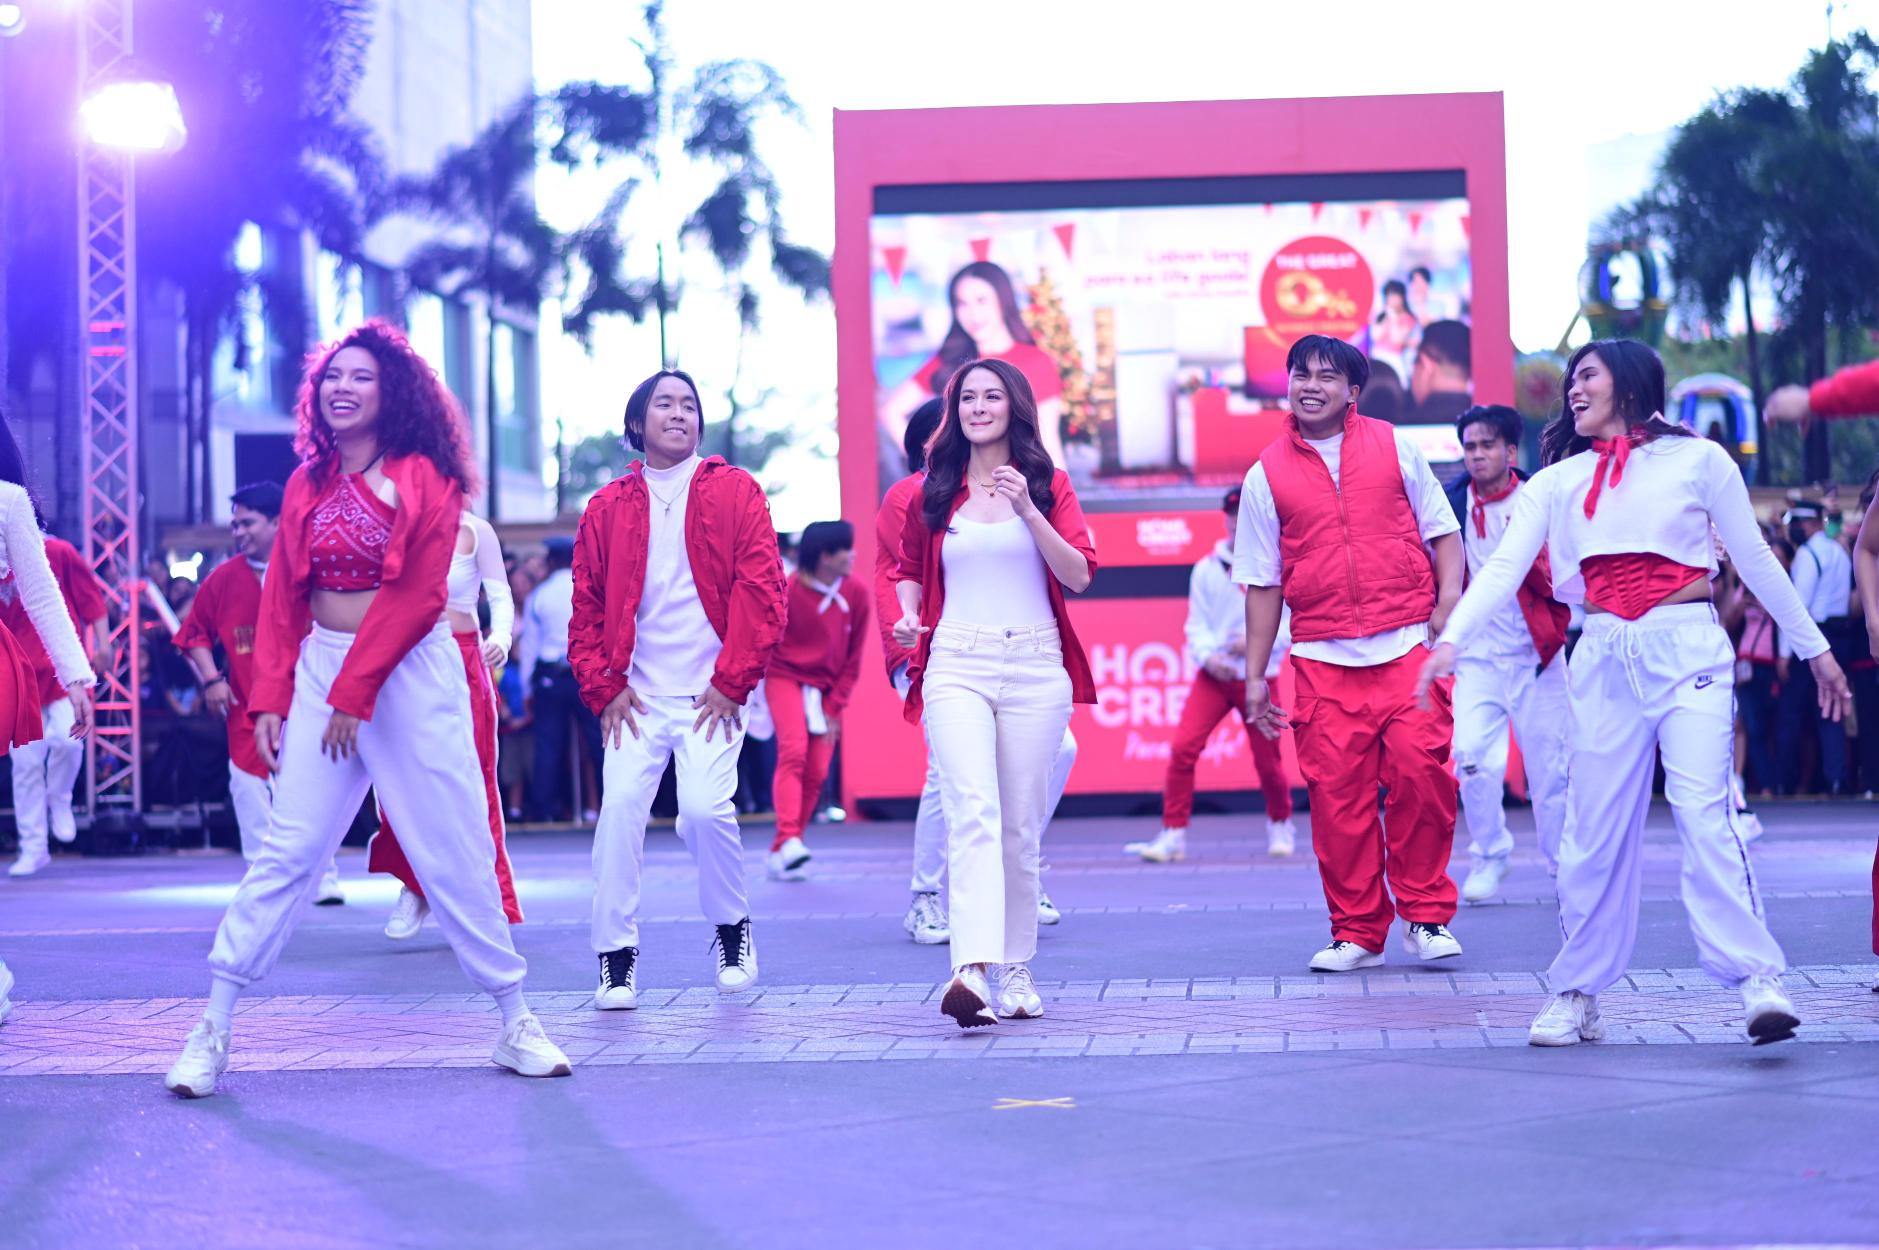 Home Credit Phils. Spreads Holiday Joy with Marian Rivera in Spectacular Flash Mob